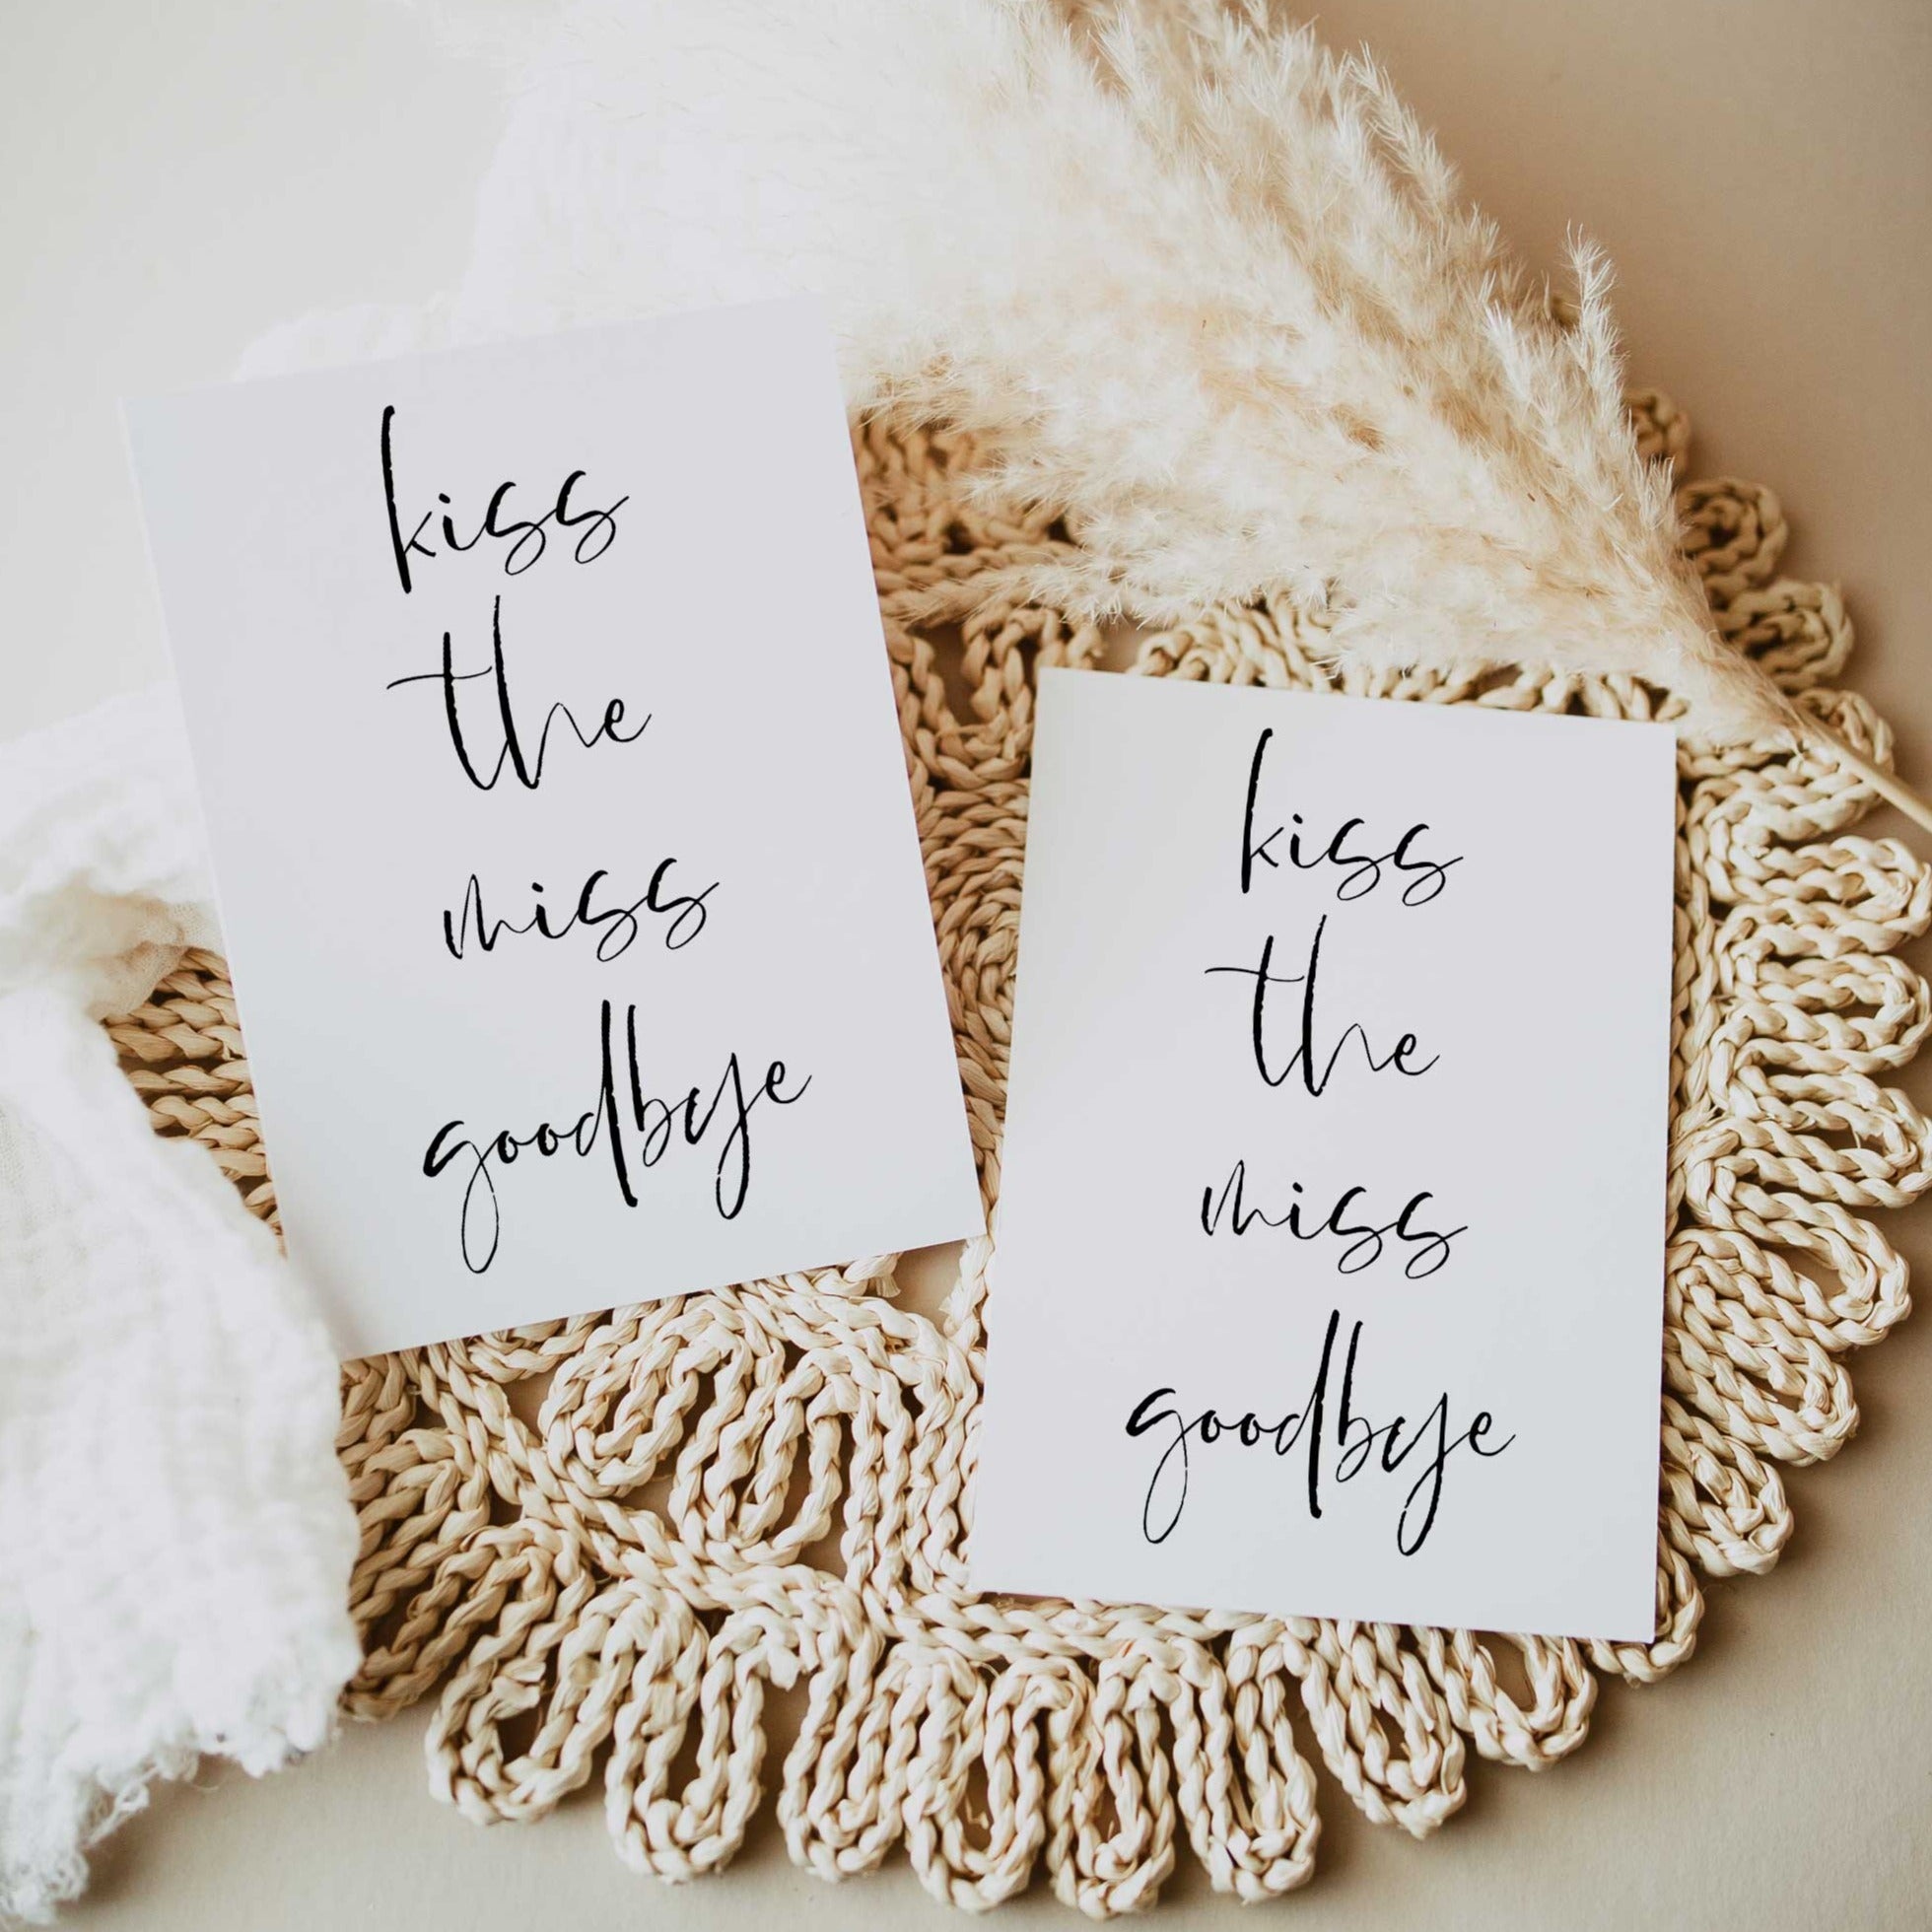 Fully editable and printable bridal shower kiss the miss goodbye game with a modern minimalist design. Perfect for a modern simple bridal shower themed party